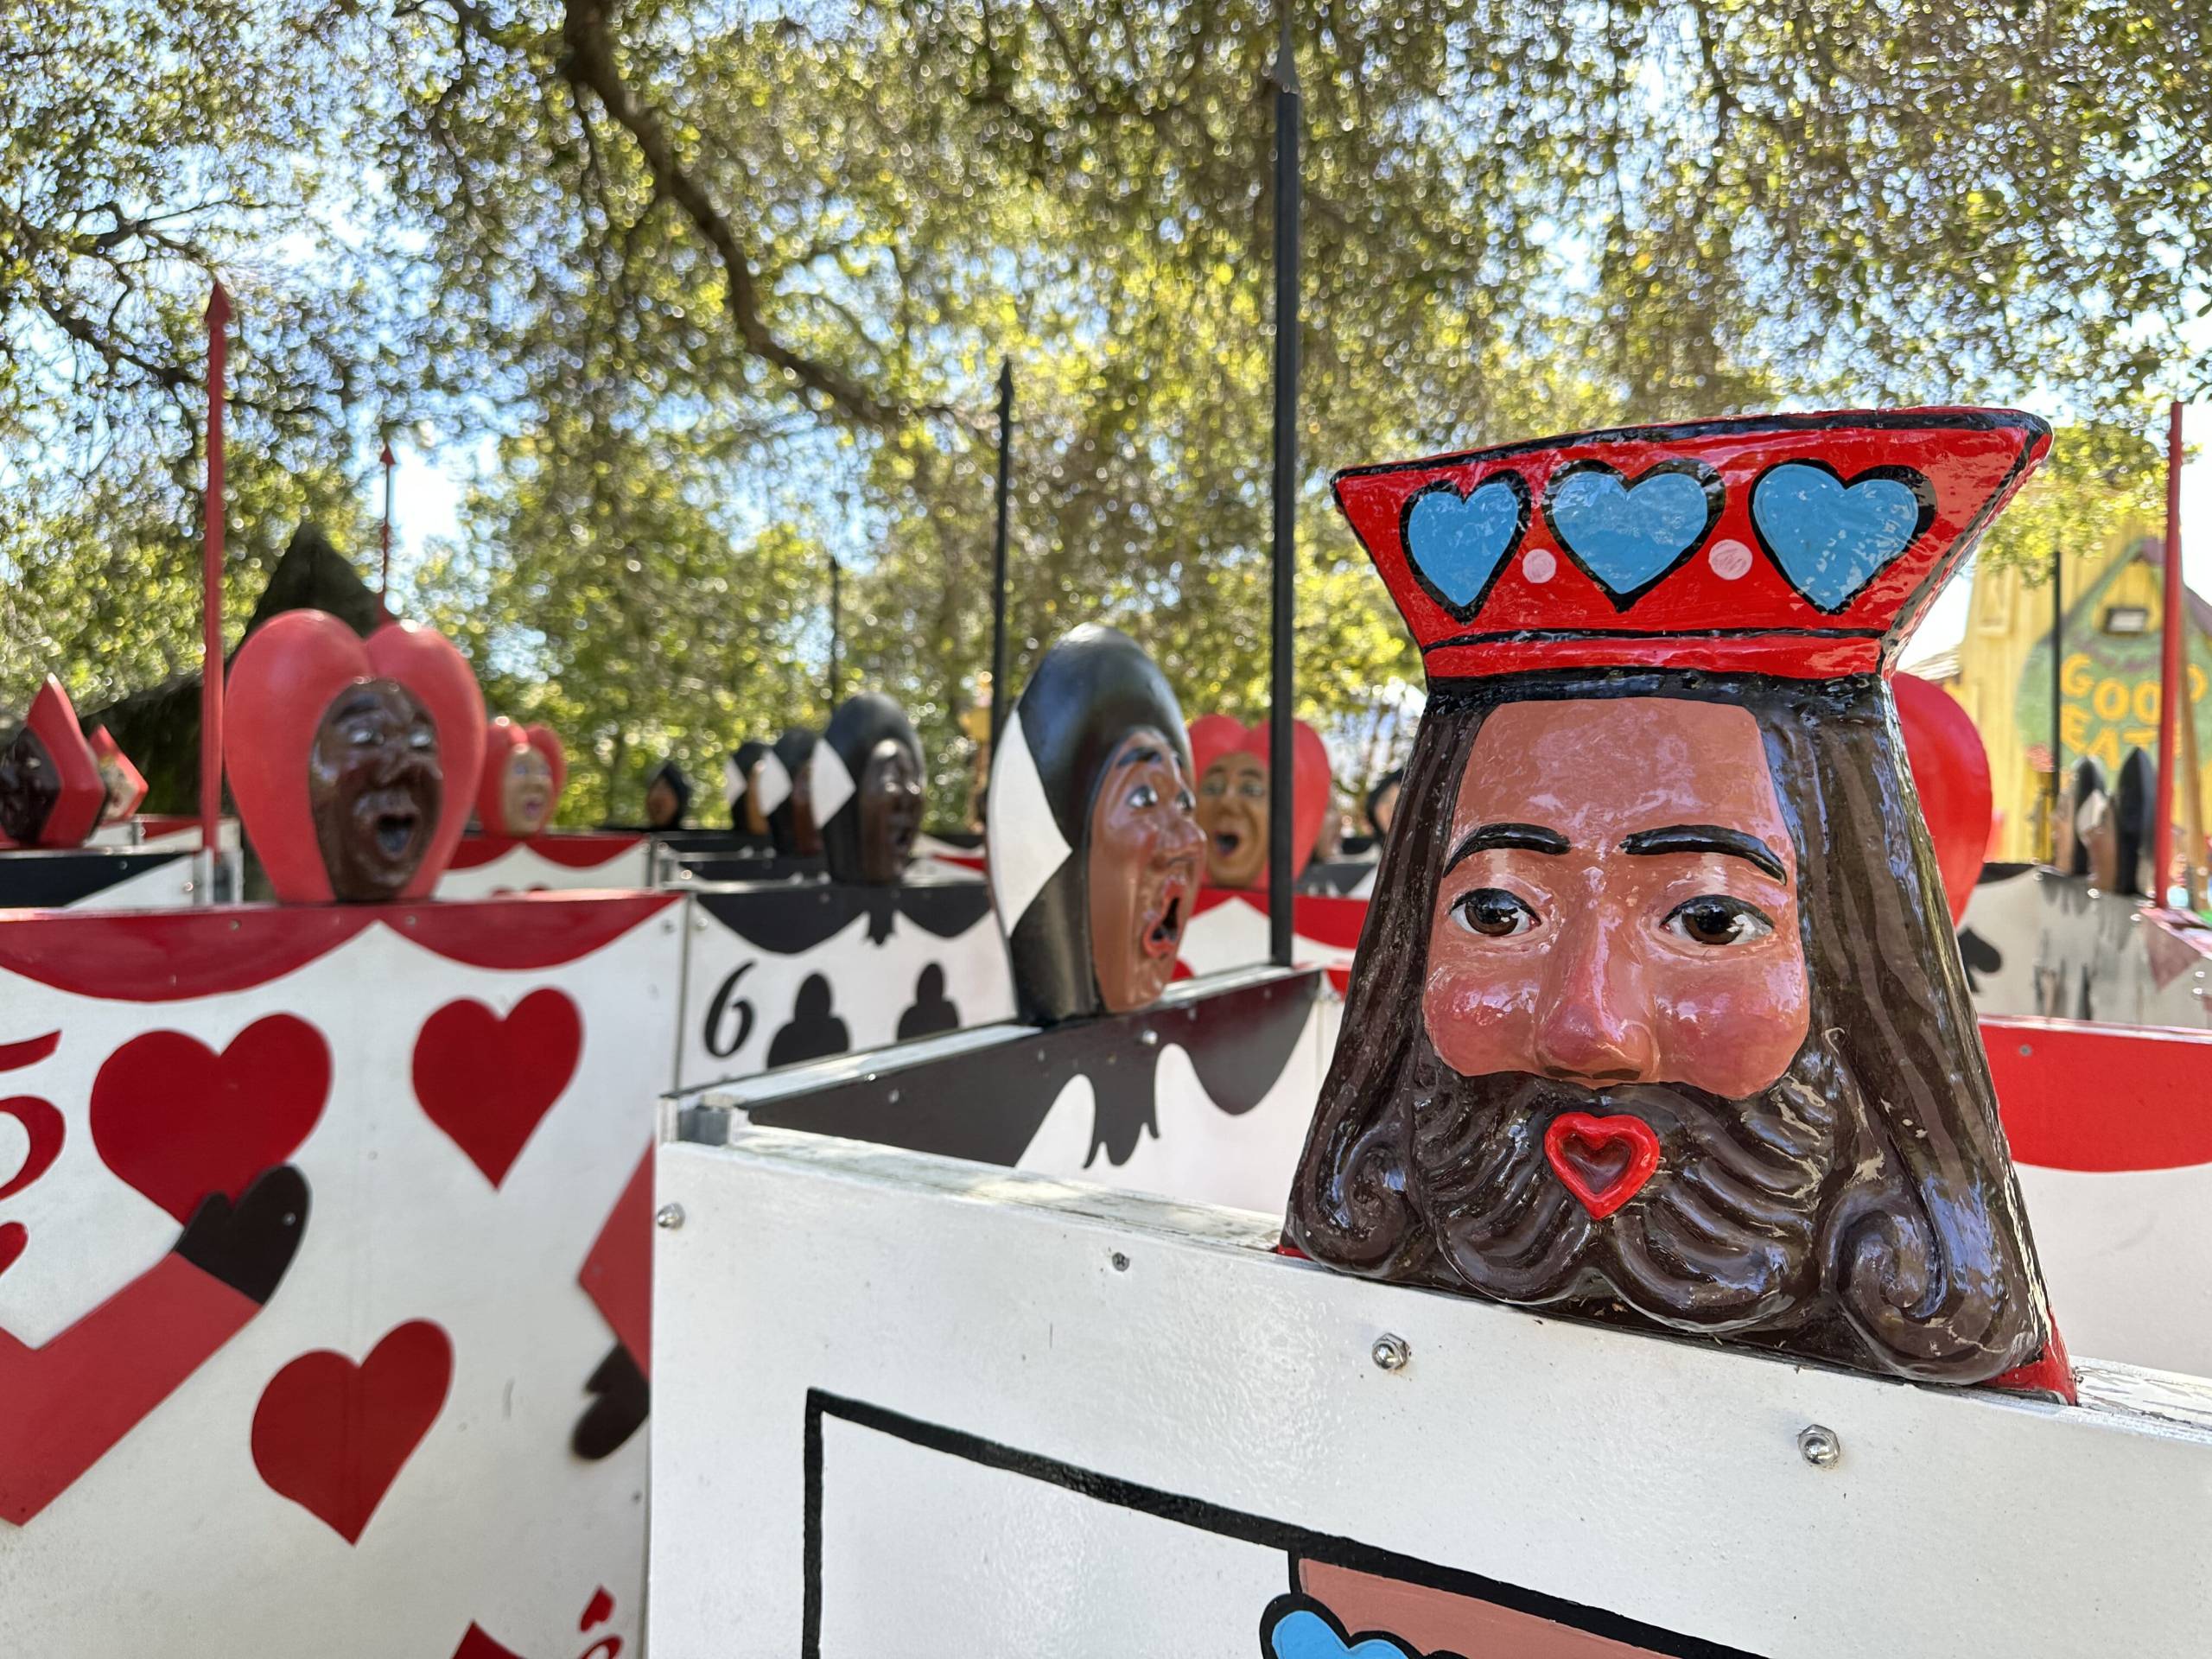 A view of the anthropomorphic playing cards from Alice in Wonderland, arranged side-by-side to form a maze. Each red or black playing card has a flat head at the top, with various skin tones and facial expressions (although most look surprised).